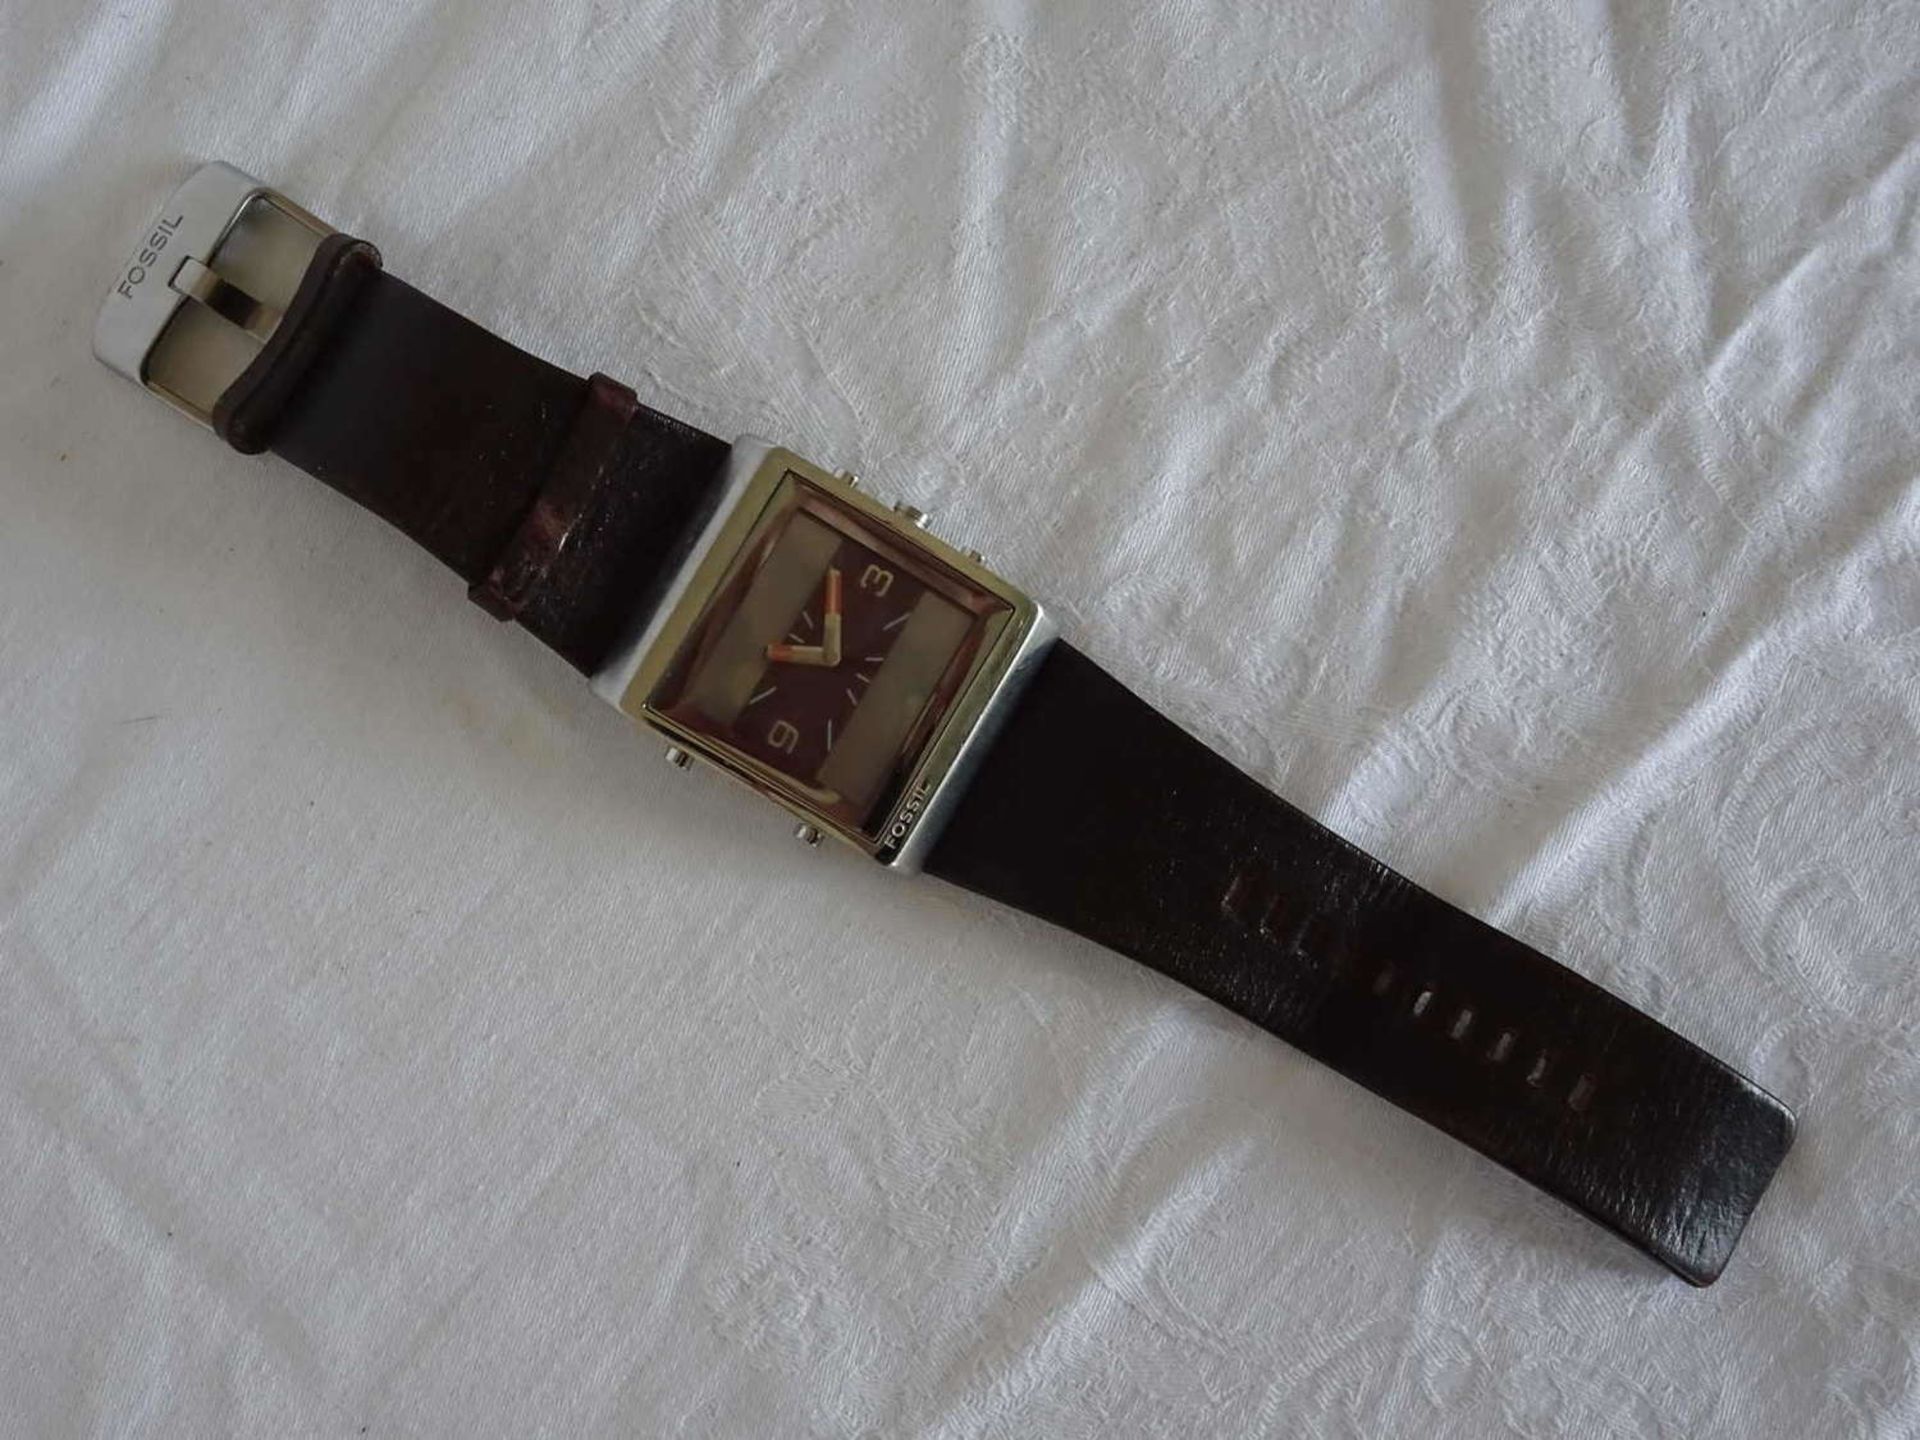 Fossil wristwatch with original leather strap. Function not checked. Used, fairly good condition.